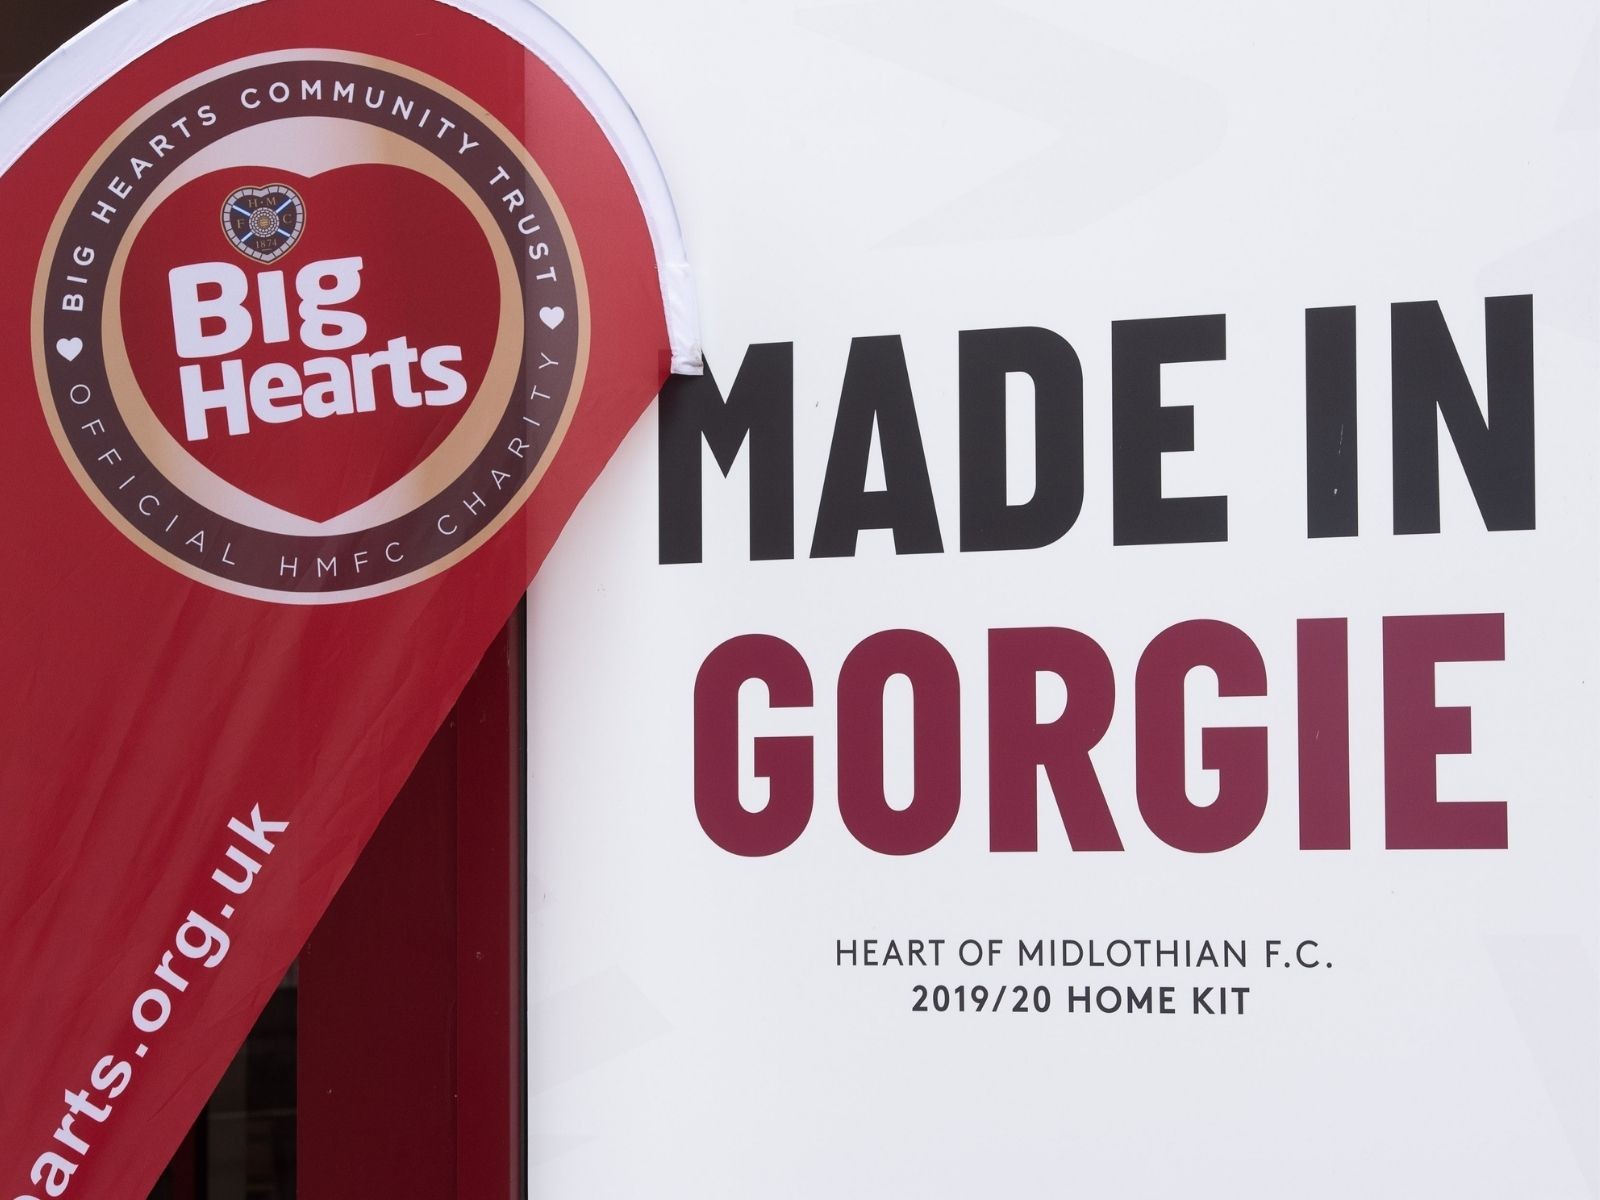  » OPEN LETTER TO OUR SUPPORTERS | BIG HEARTS COMMUNITY TRUST